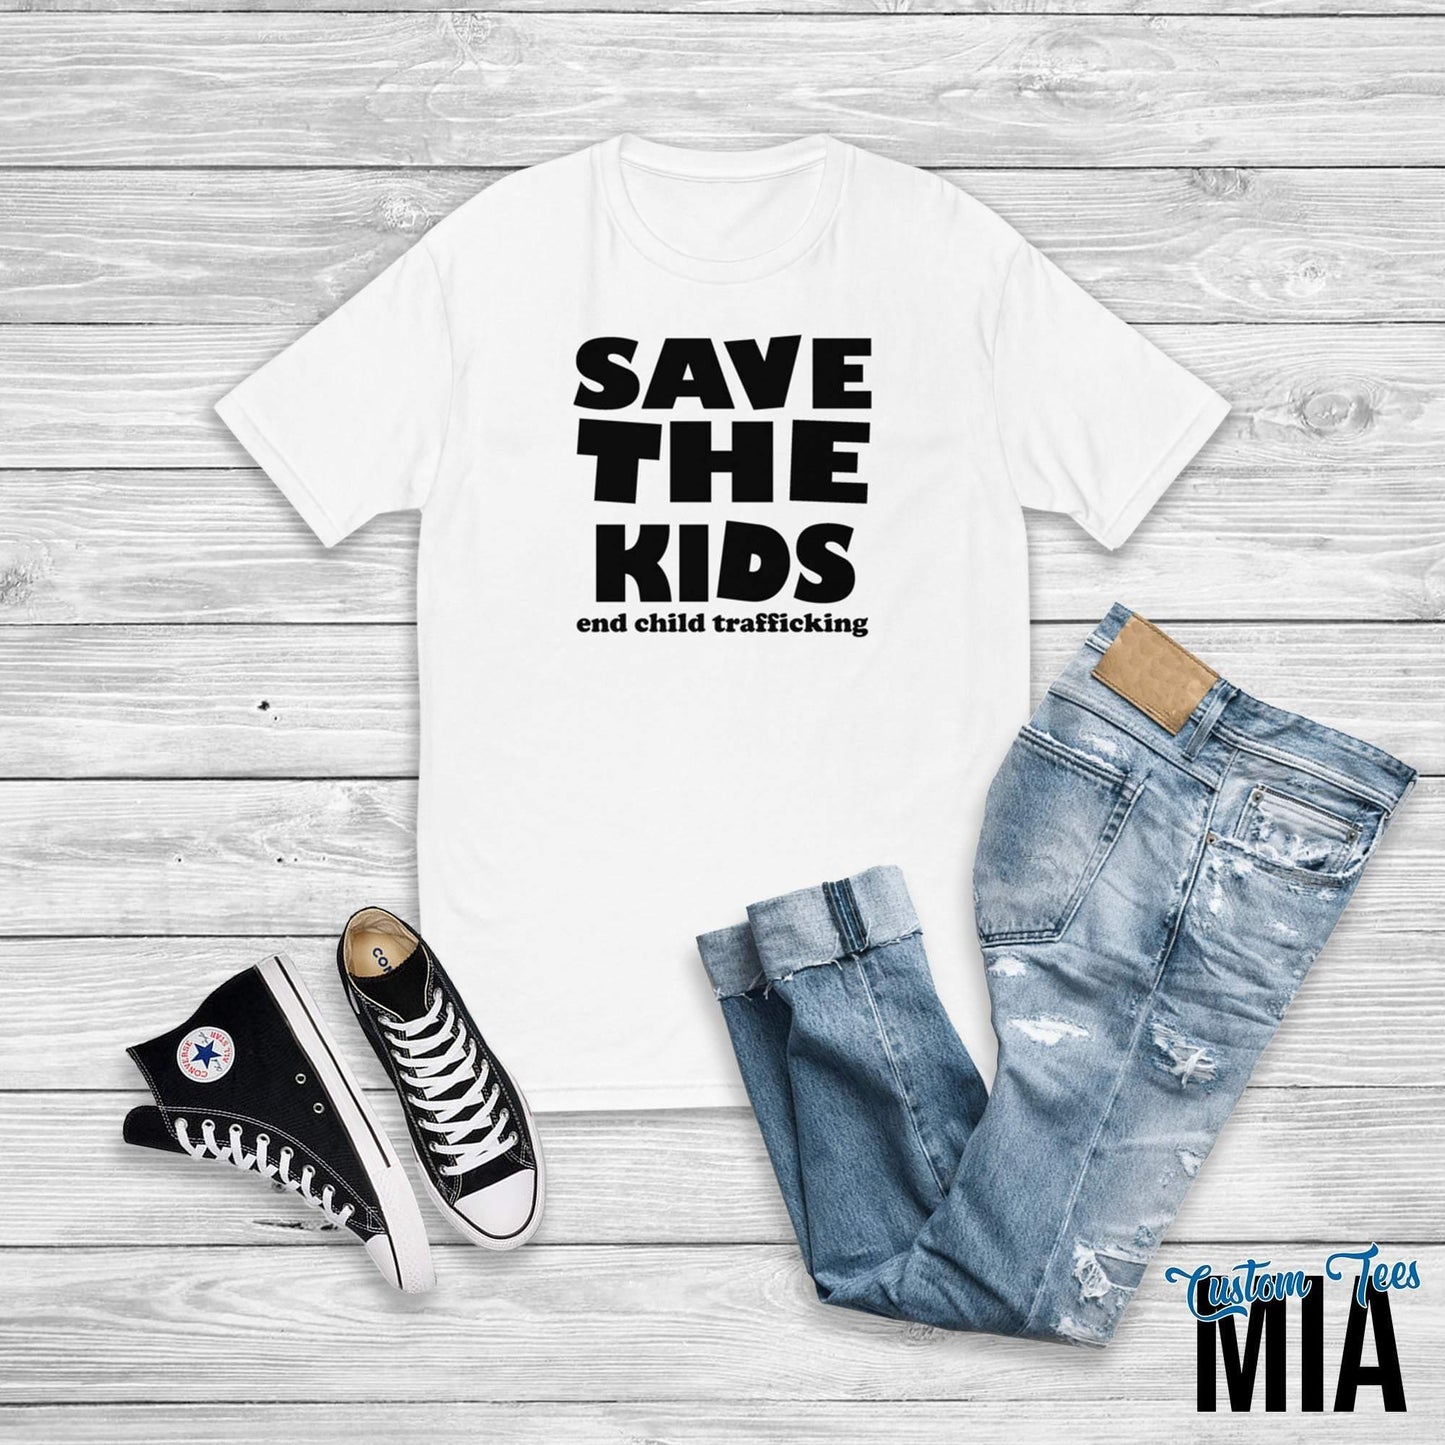 Save The Kids T-Shirt - Save Our Children - Child Lives Matter - Awareness Shirt - Human Rights Shirt - Be Their Voice - Custom Tees MIA